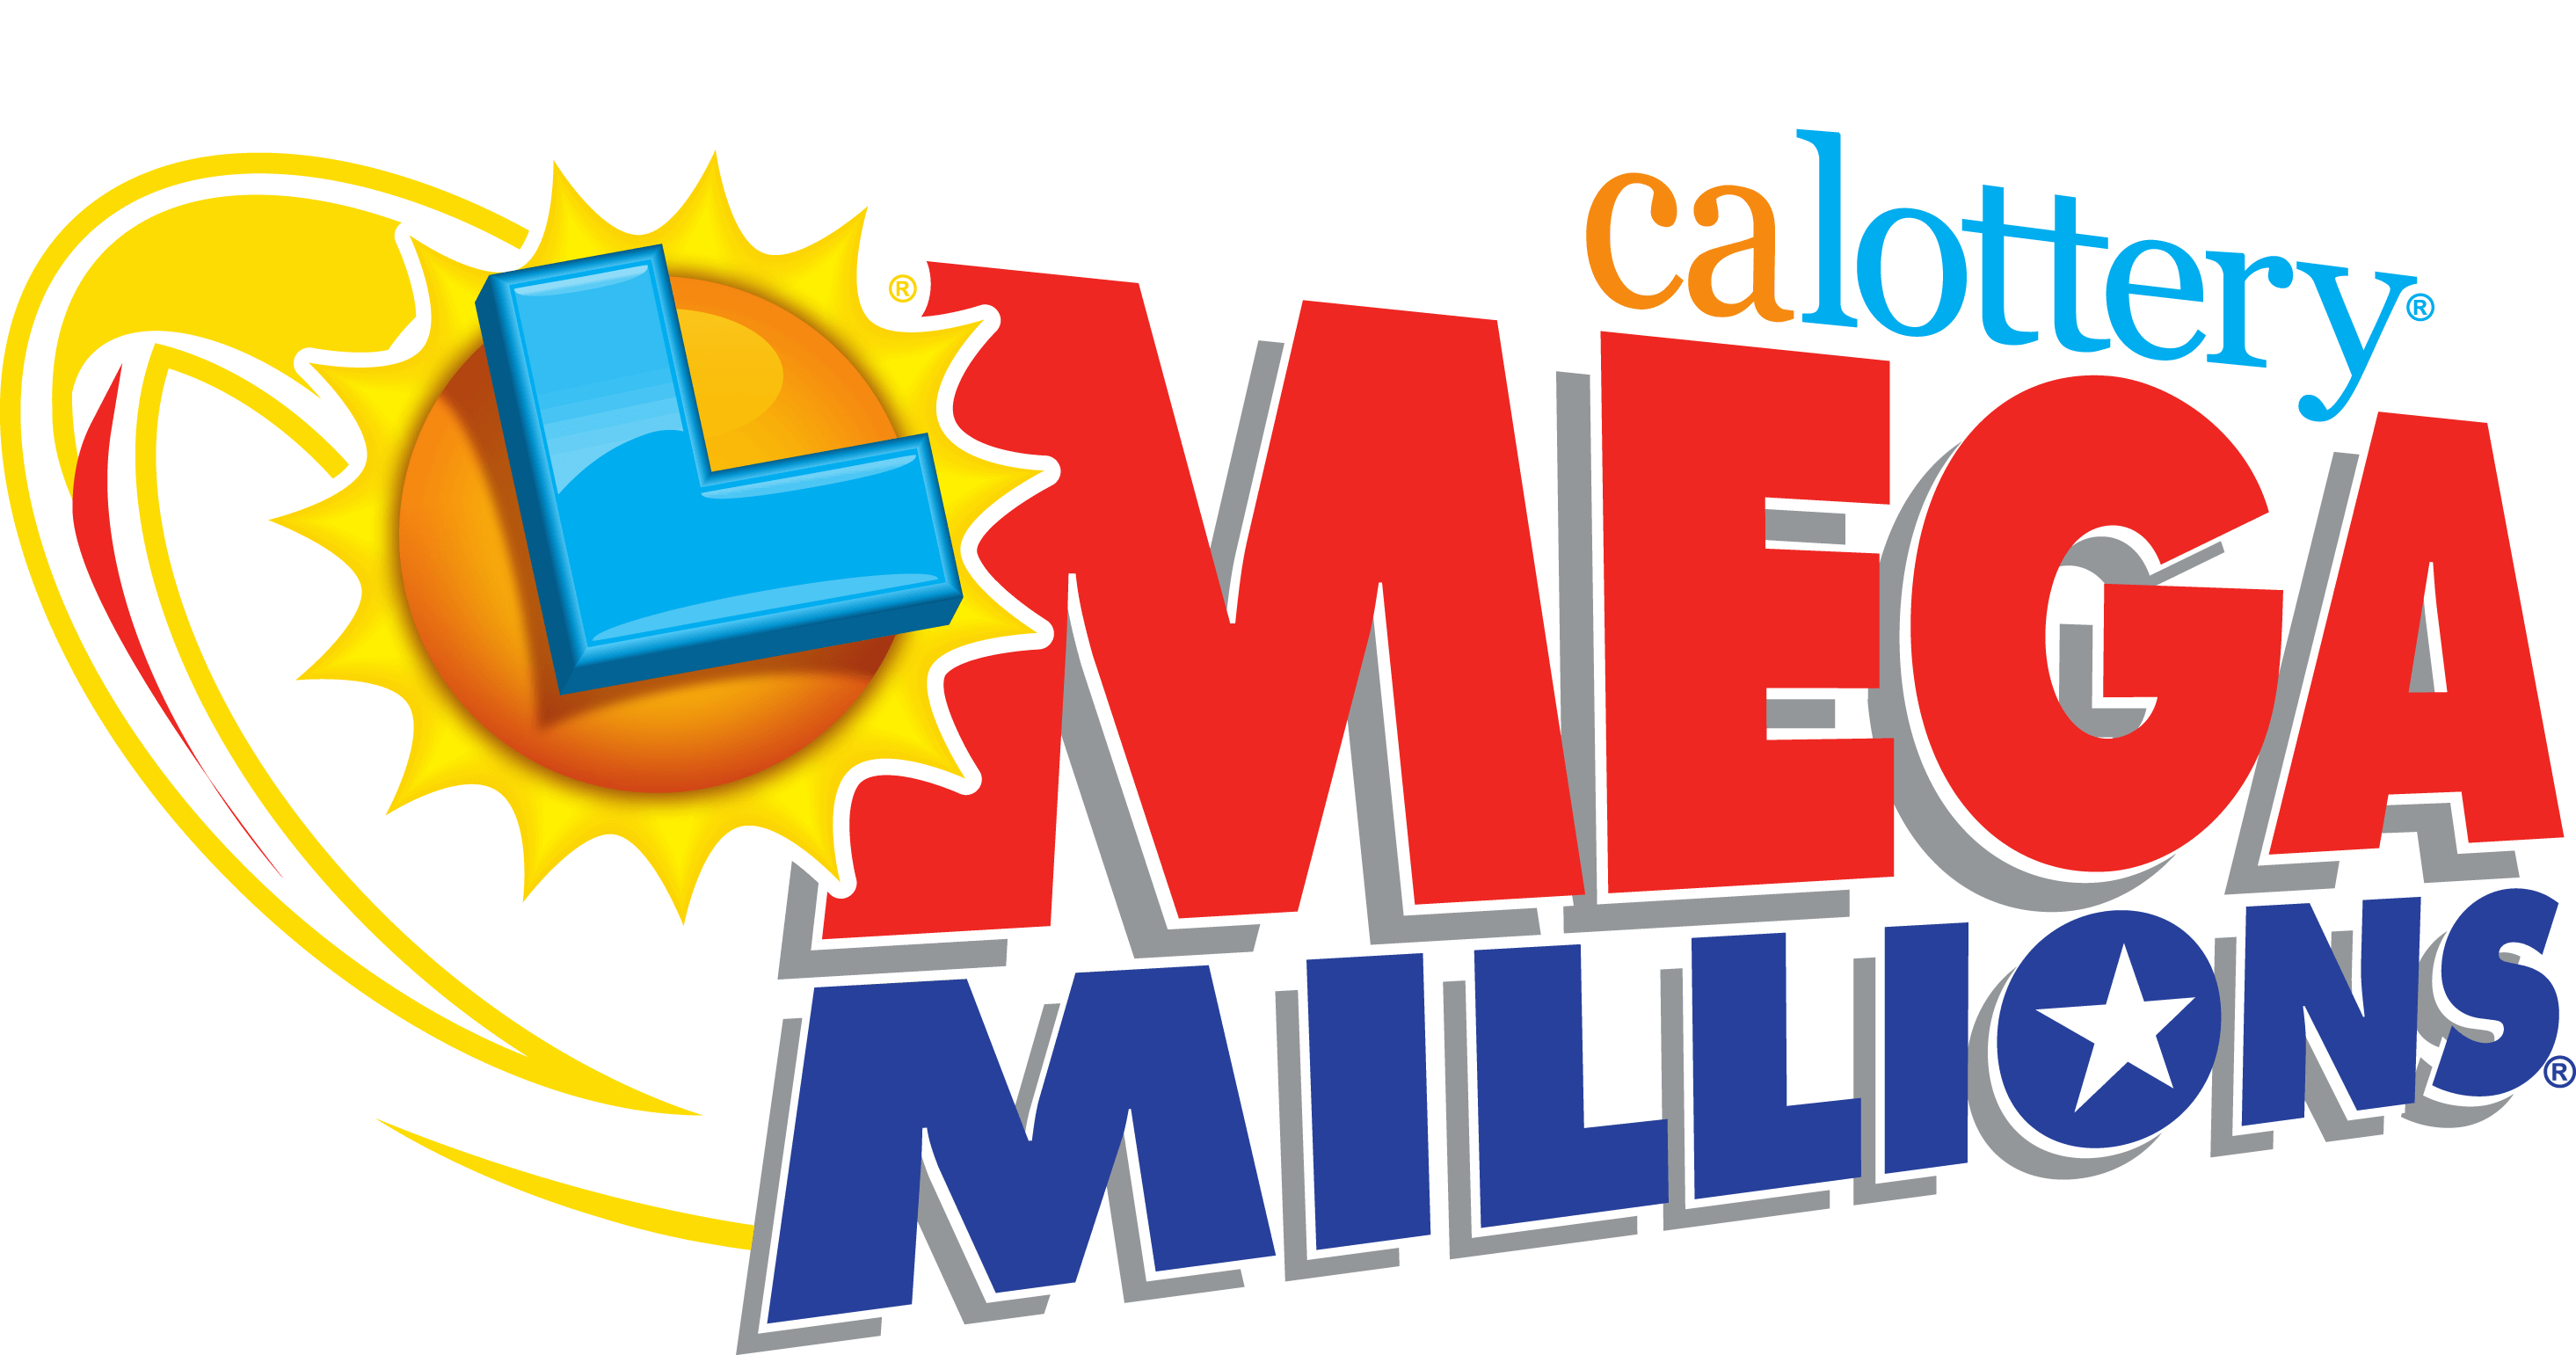 california state lottery